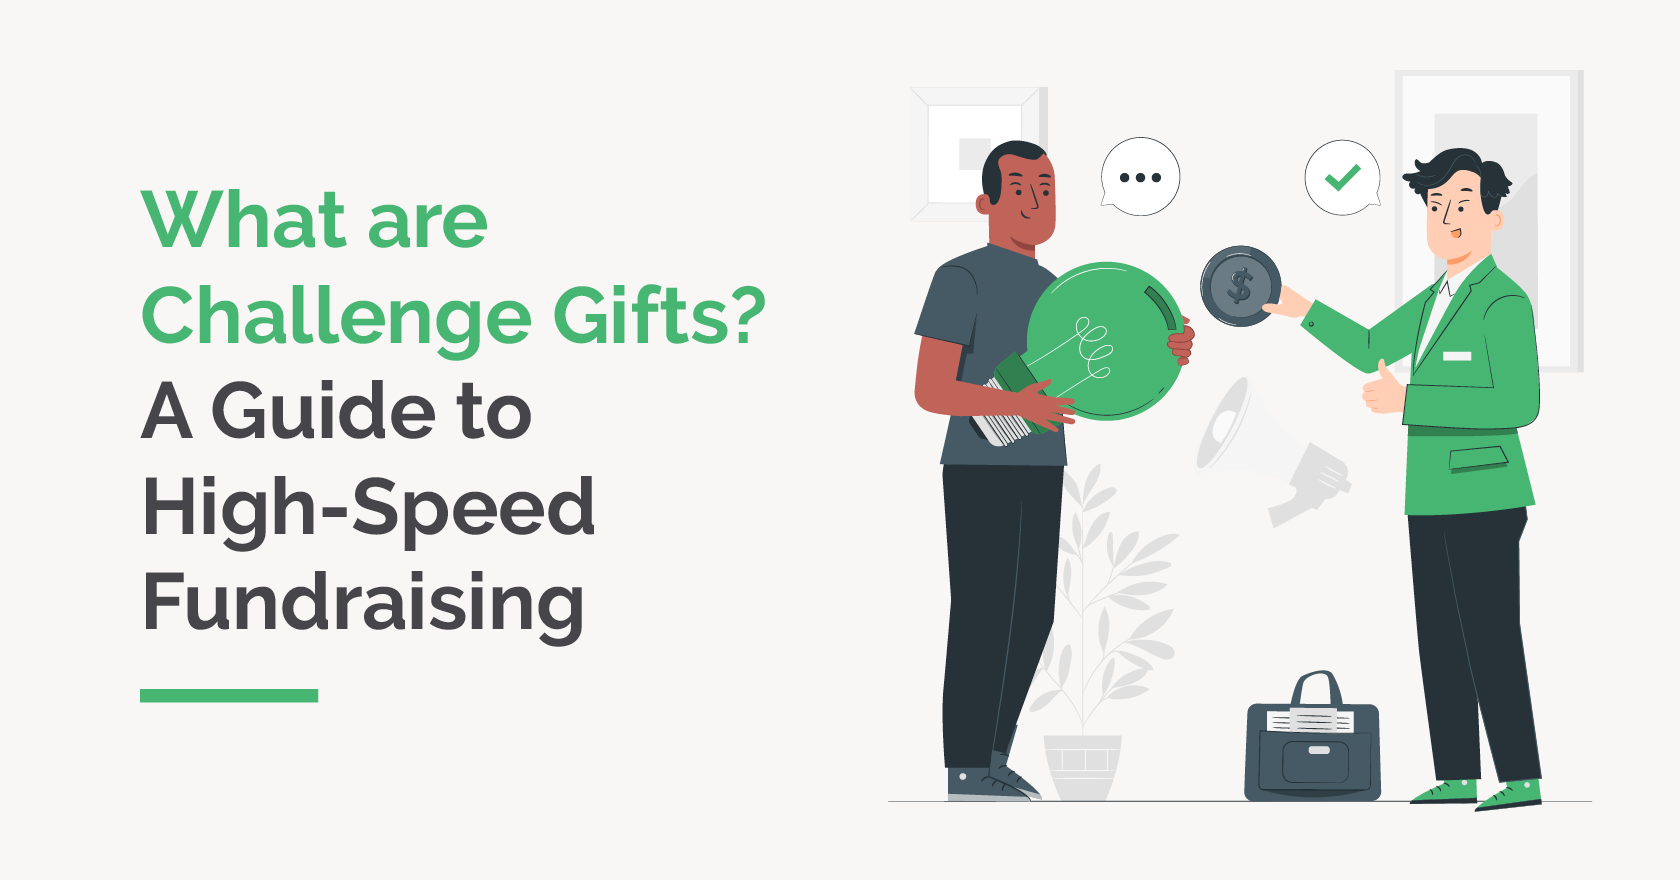 This guide will cover the basics of challenge gifts to help you leverage this form of giving for your fundraising efforts.